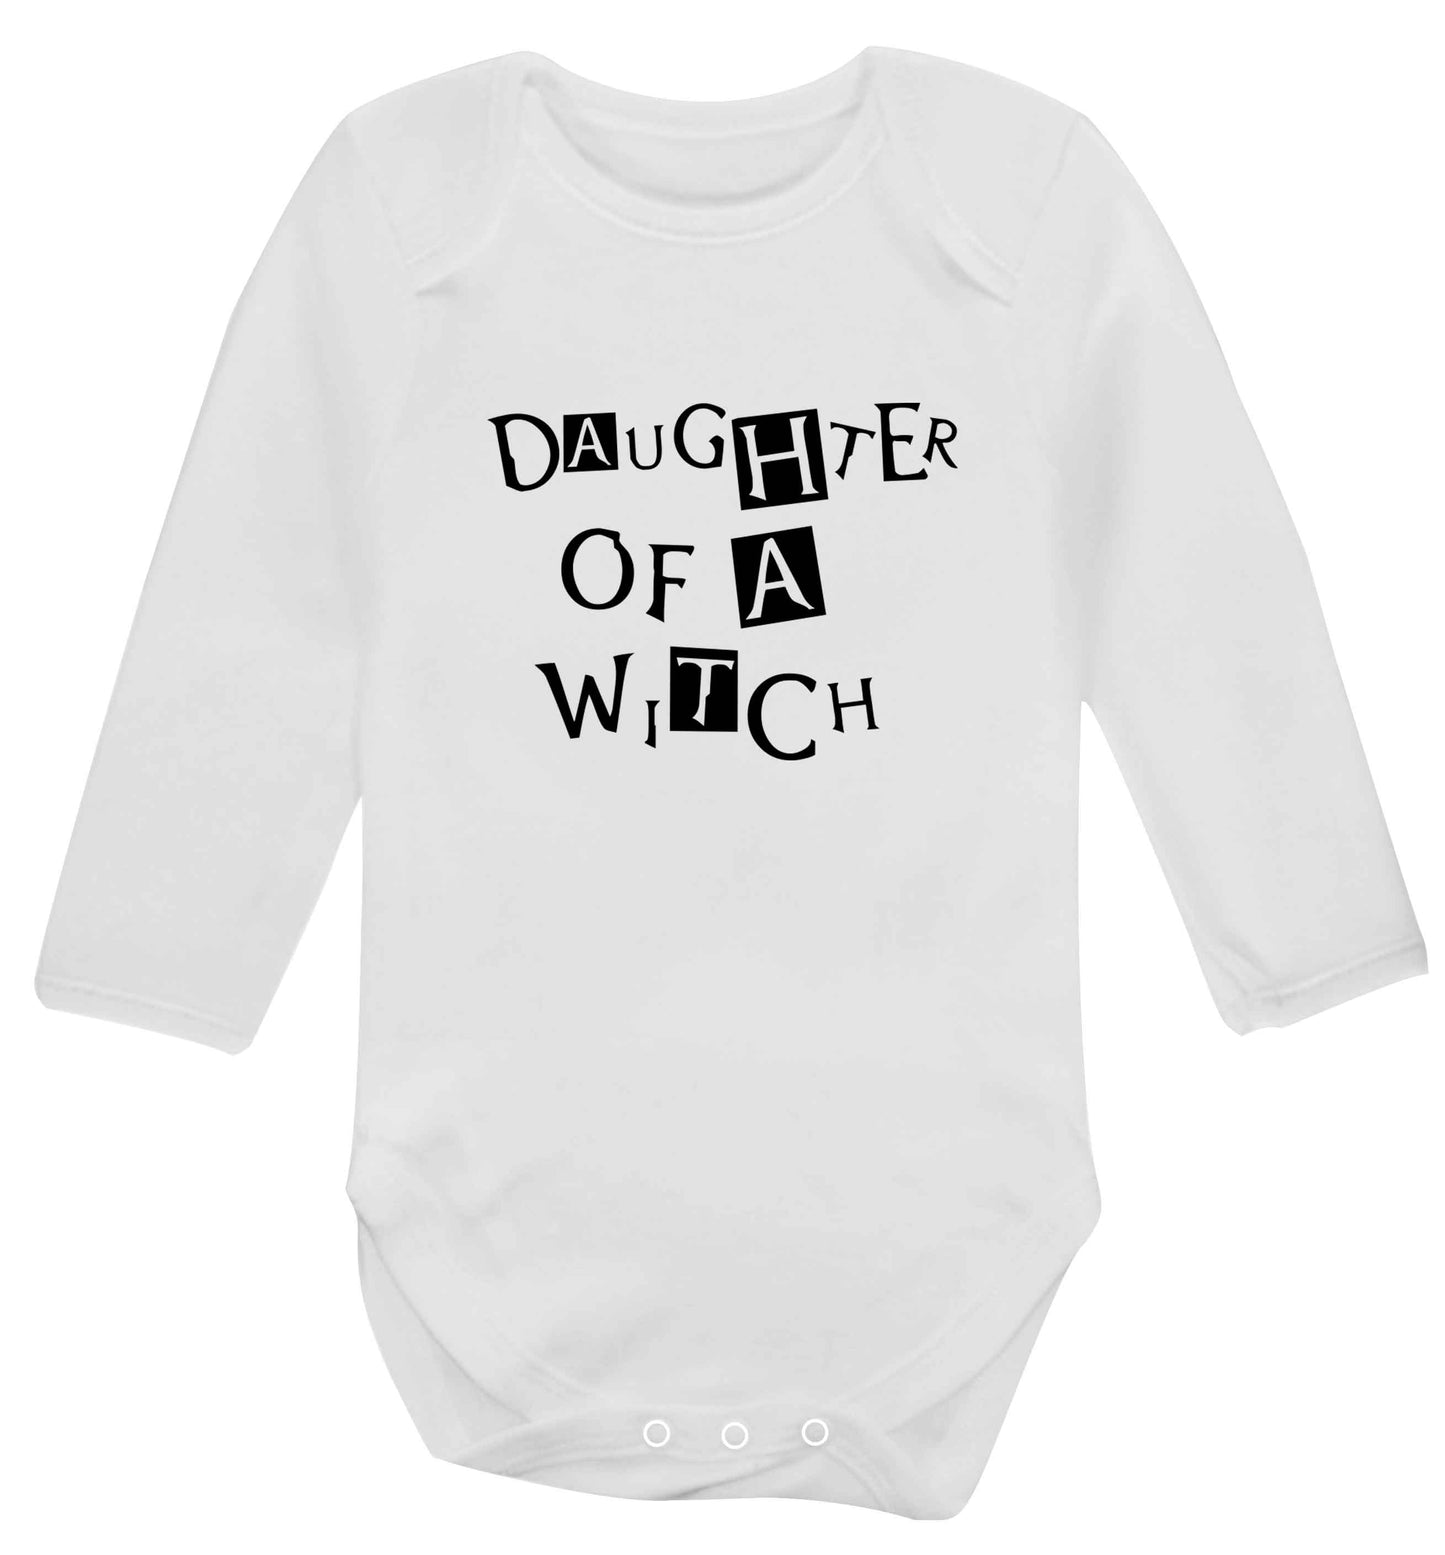 Daughter of a witch baby vest long sleeved white 6-12 months